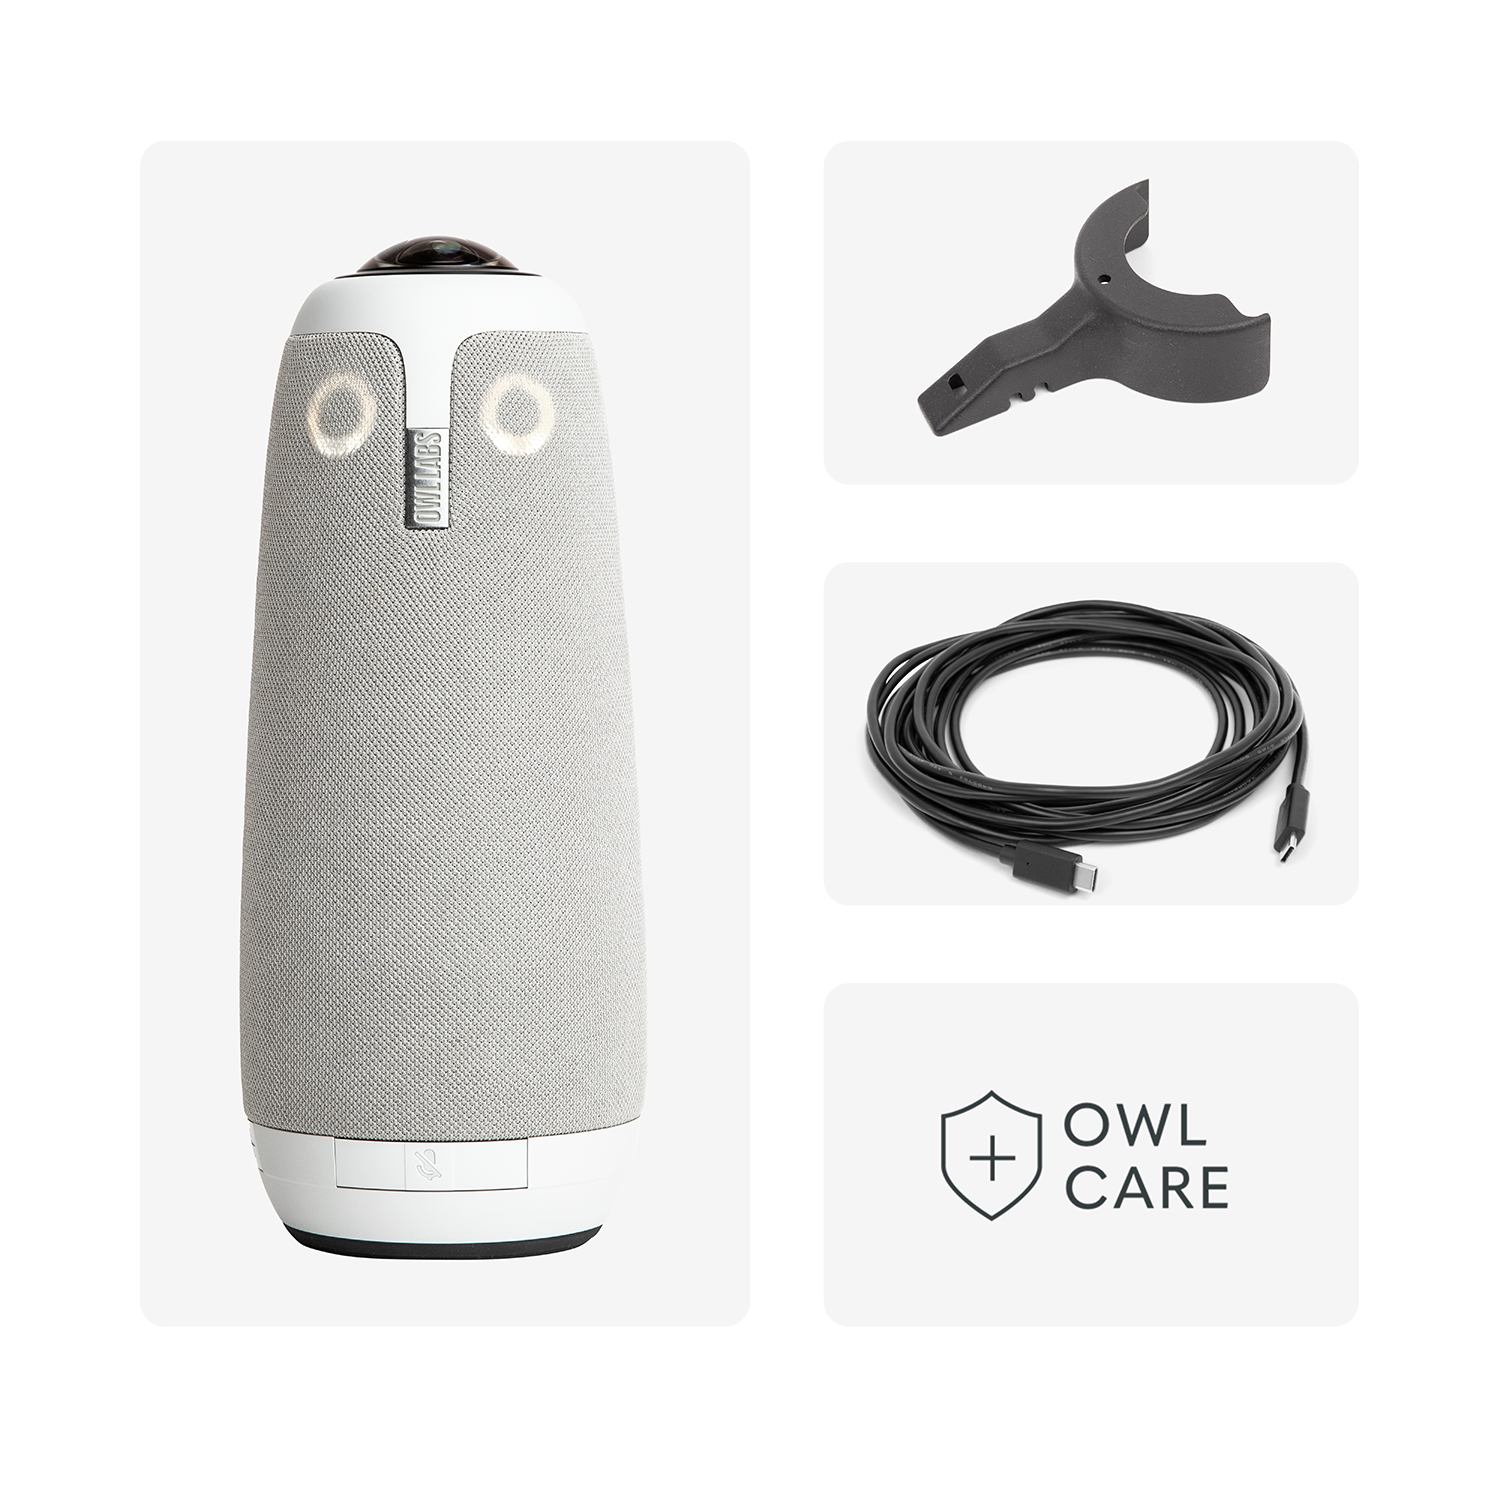 Meeting Owl 3: 360° Video Conferencing Camera, Mic, and Speaker